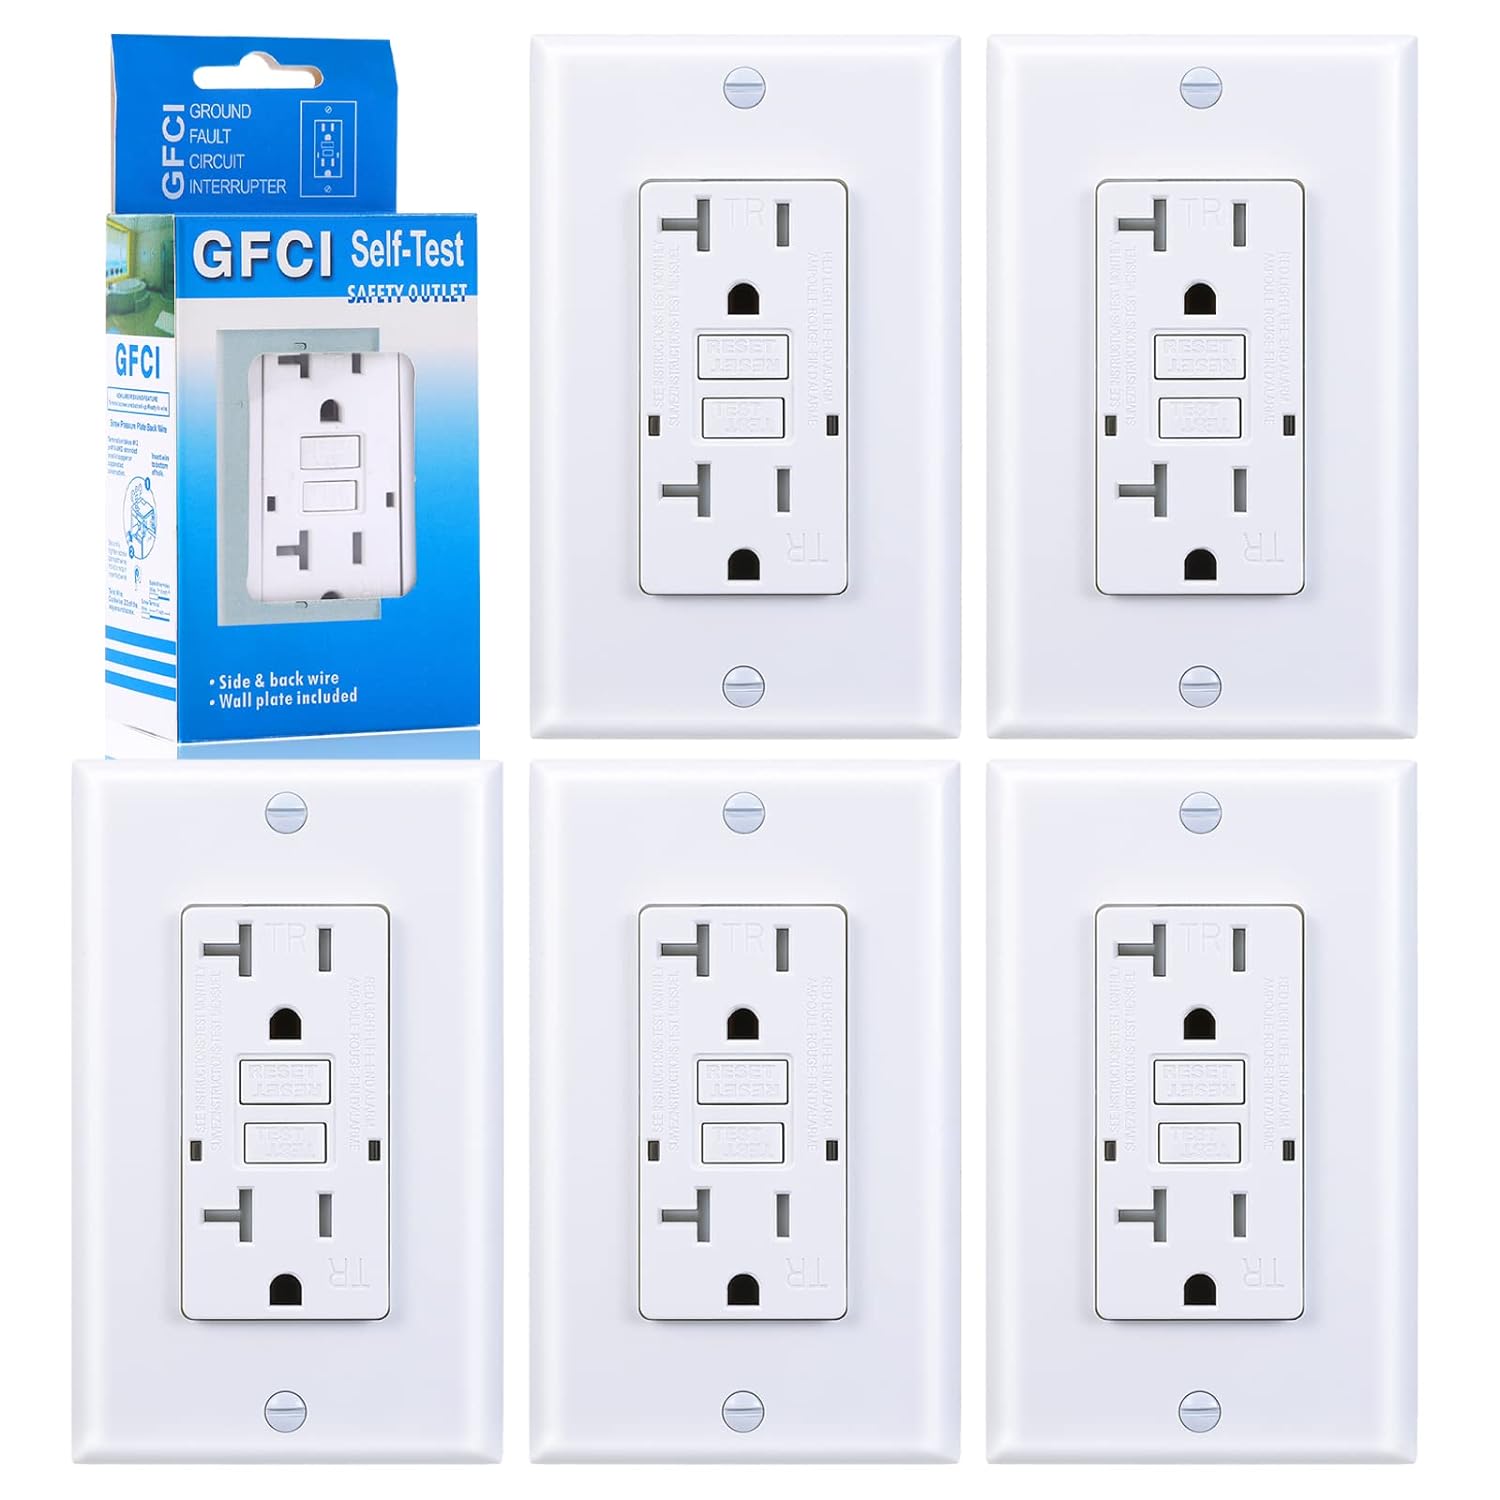 20 Amp GFCI Outlet, Tamper-Resistant GFI Receptacle with LED Indicator, Self-Test Ground Fault Circuit Interrupter, Decorator Wall Plates and Screws Included, UL Listed, White (5 Pack)